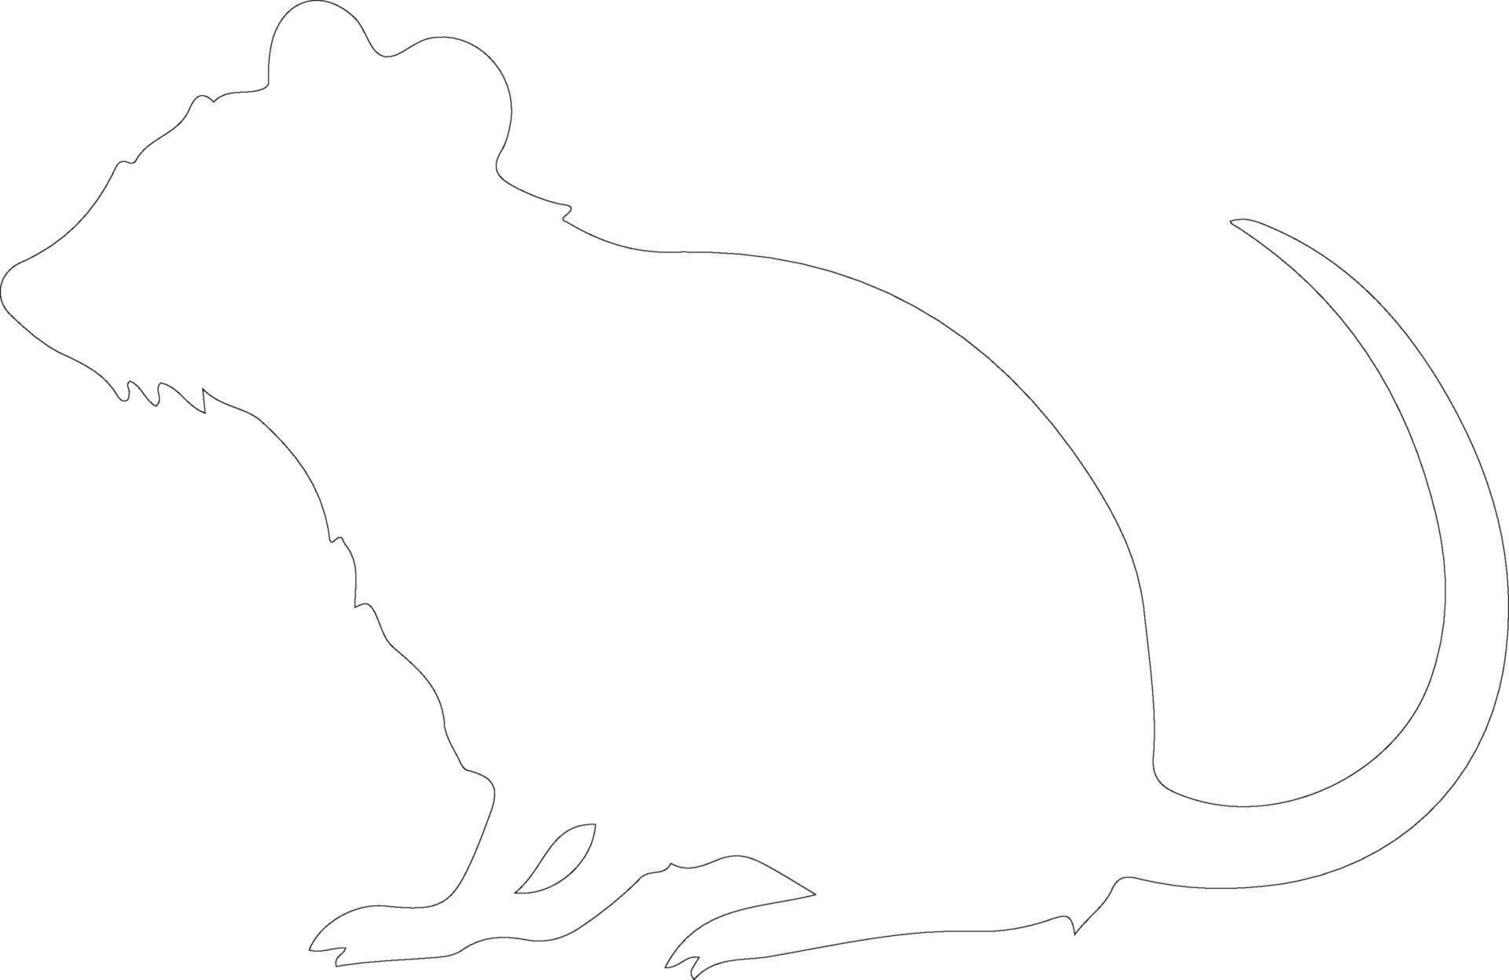 bandicoot  outline silhouette vector